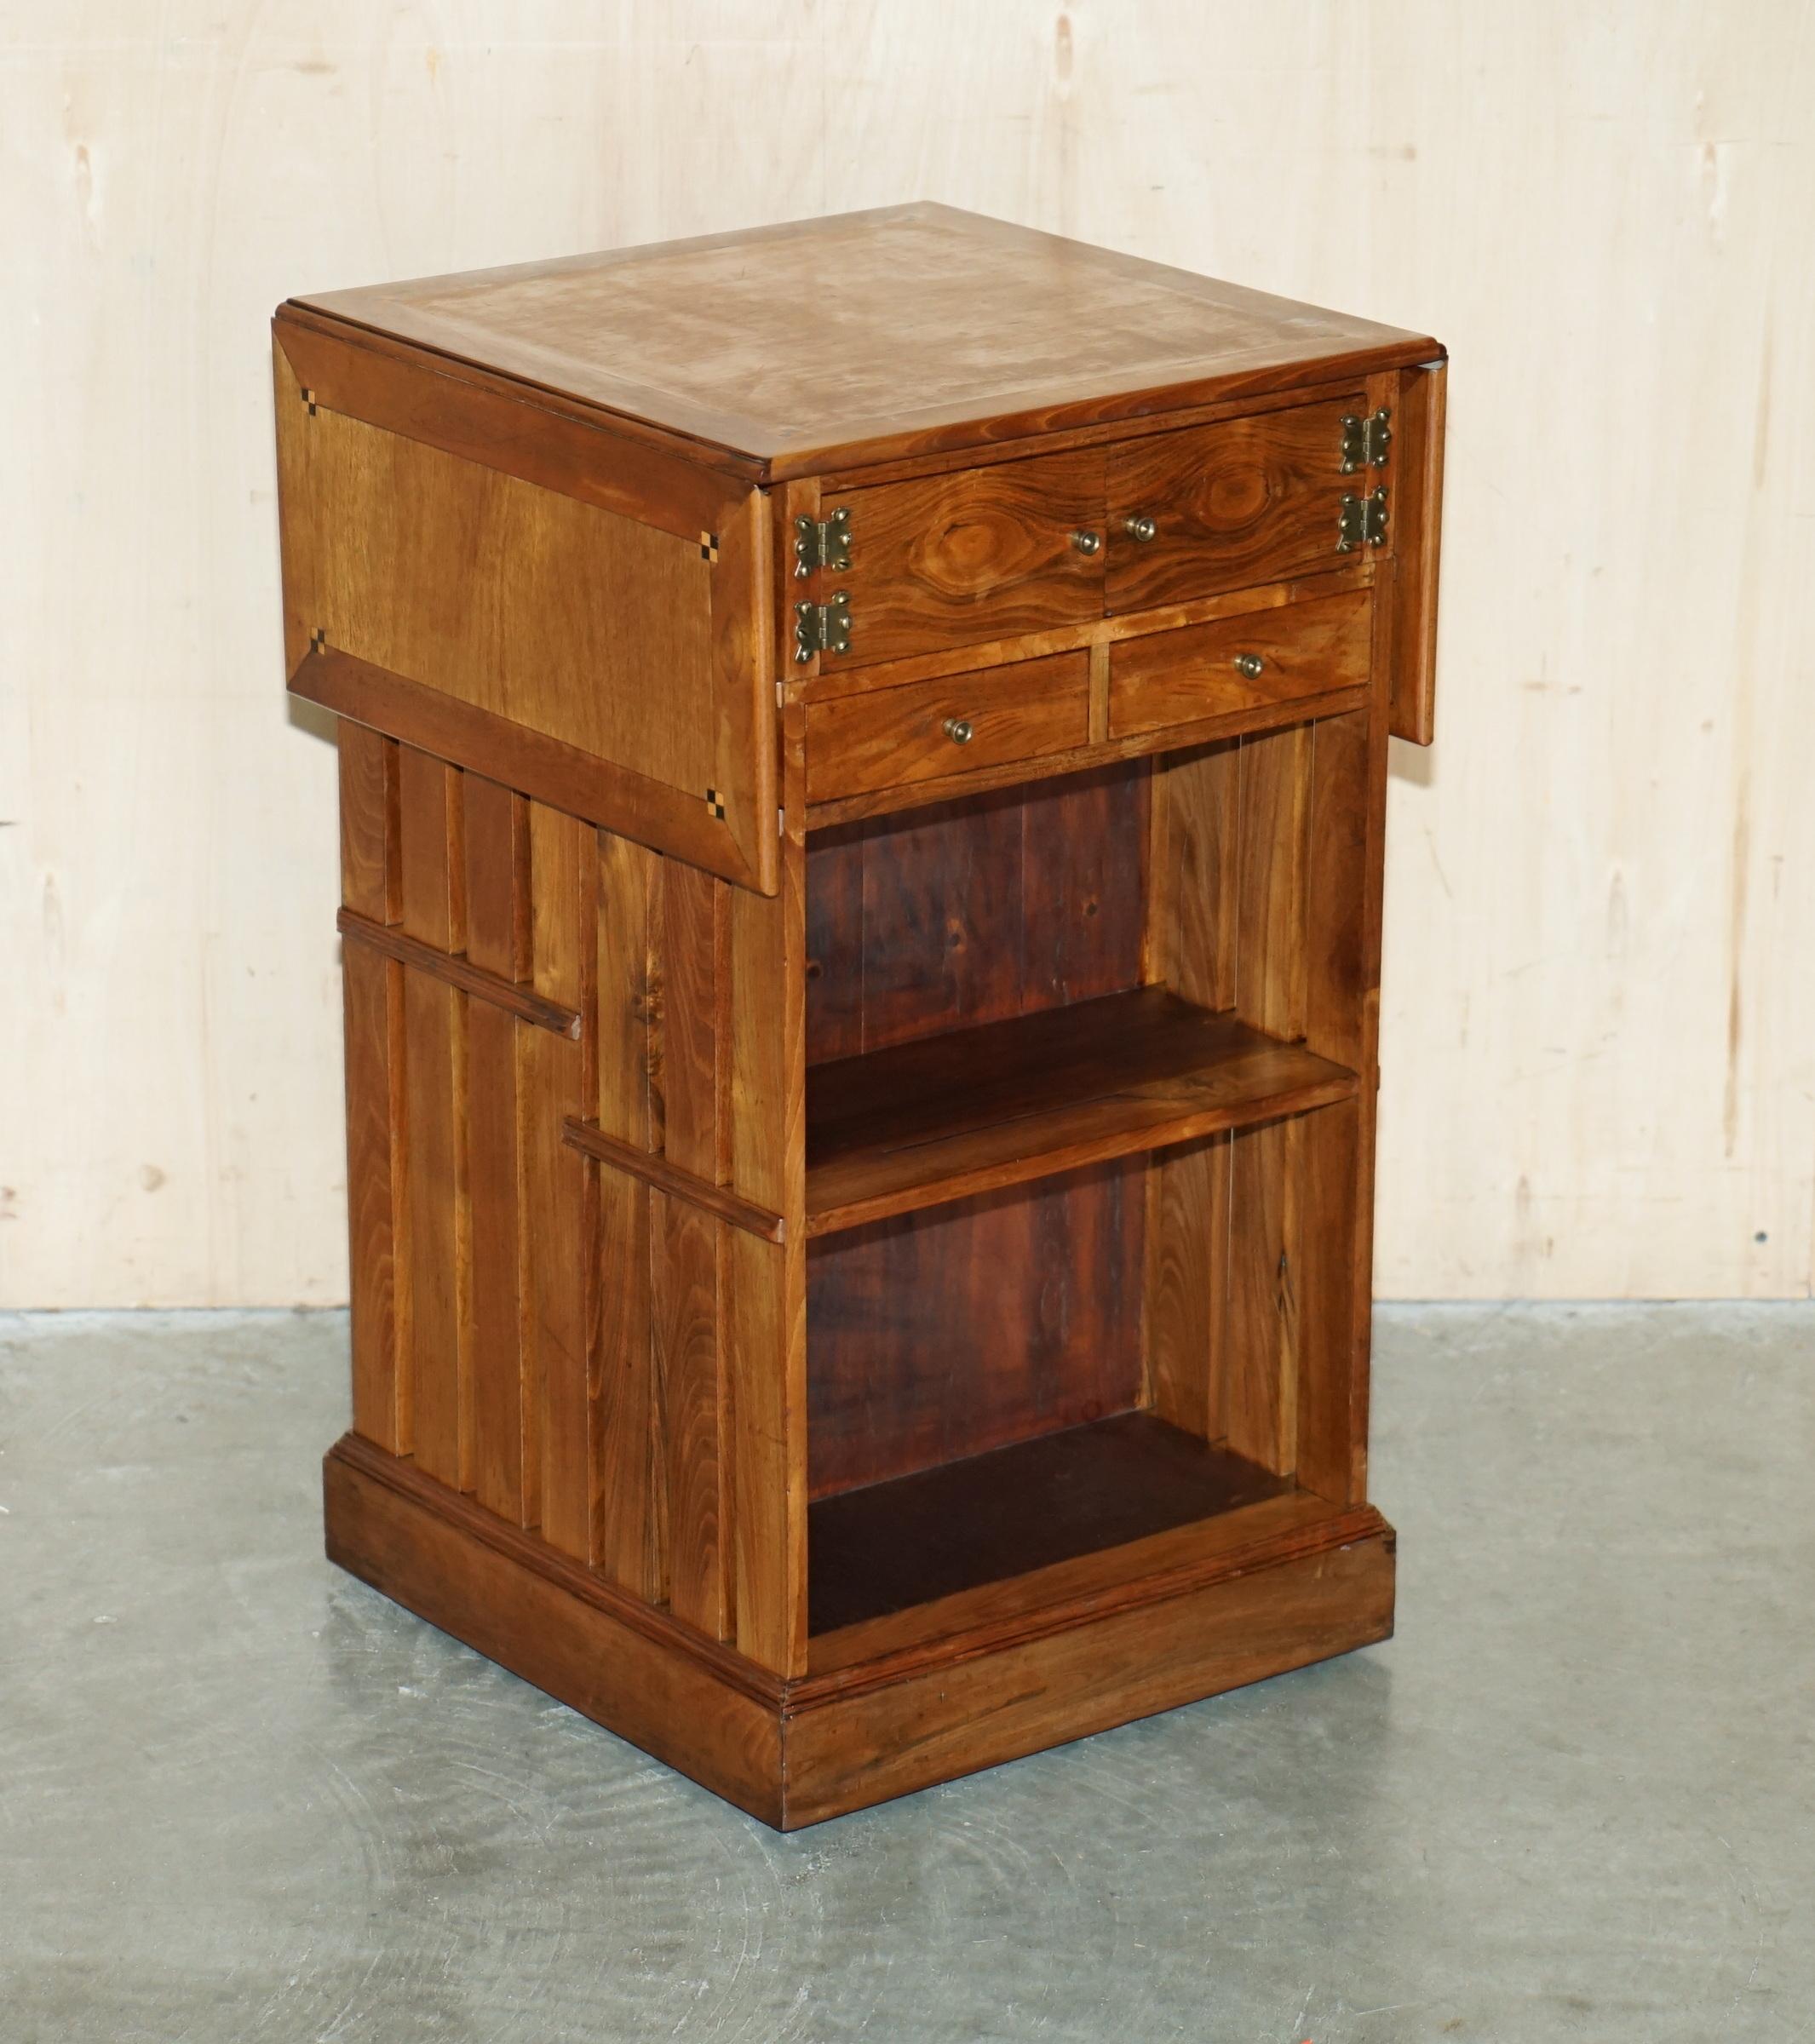 Royal House Antiques

Royal House Antiques is delighted to offer for sale this super decorative one of a kind, custom made English Walnut with Boxwood inlay, Extending bookcase table with drawers and cupboard 

Please note the delivery fee listed is